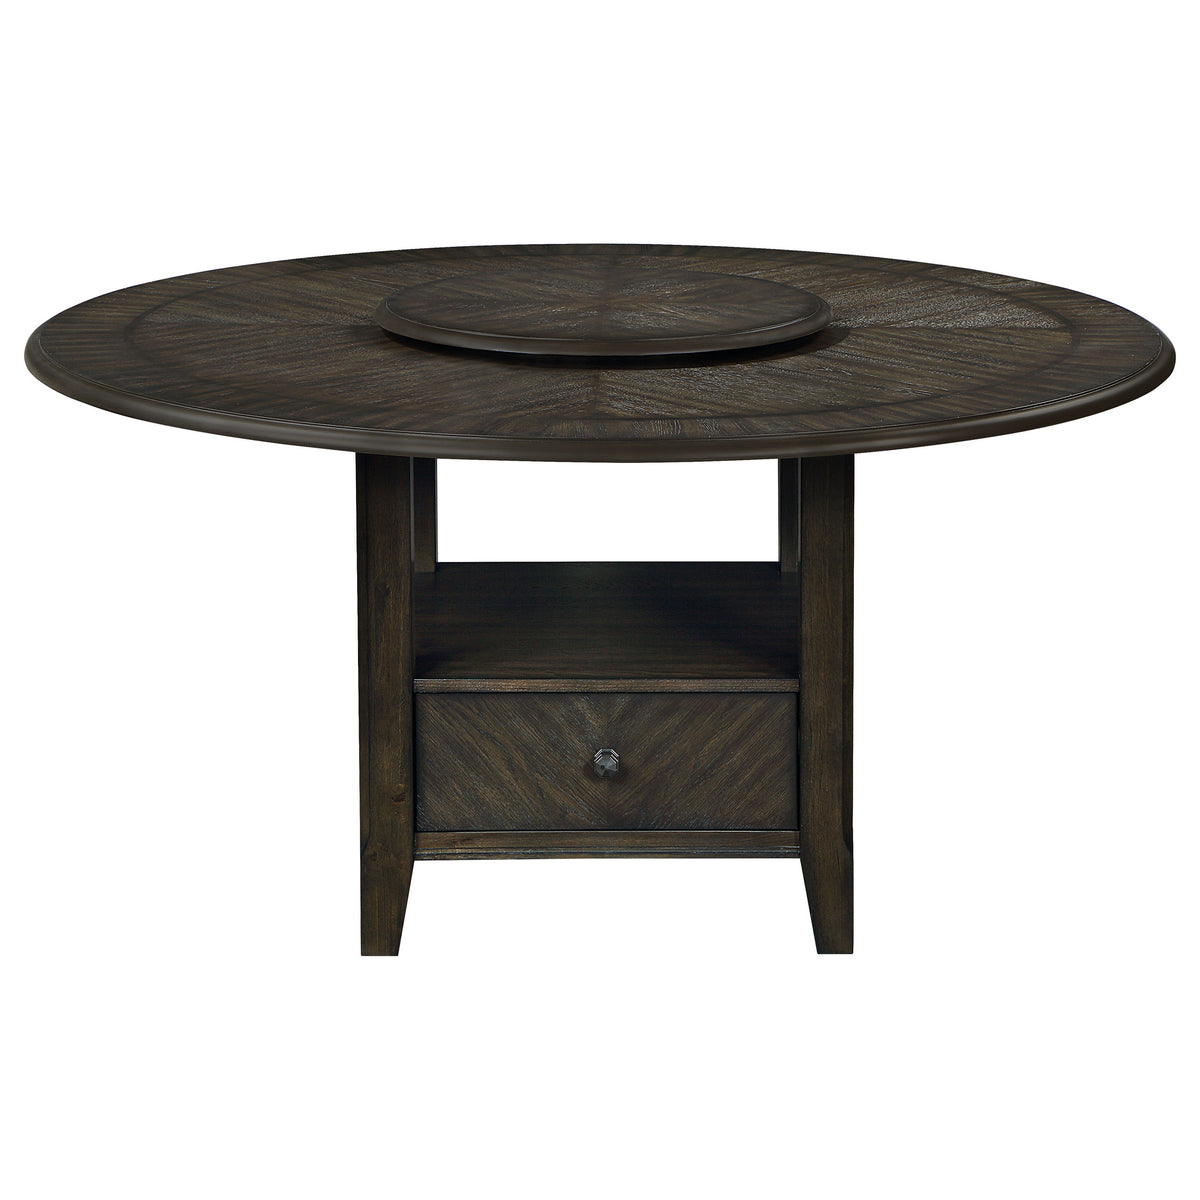 Twyla Round Dining Table with Removable Lazy Susan Dark Cocoa Twyla Round Dining Table with Removable Lazy Susan Dark Cocoa Half Price Furniture